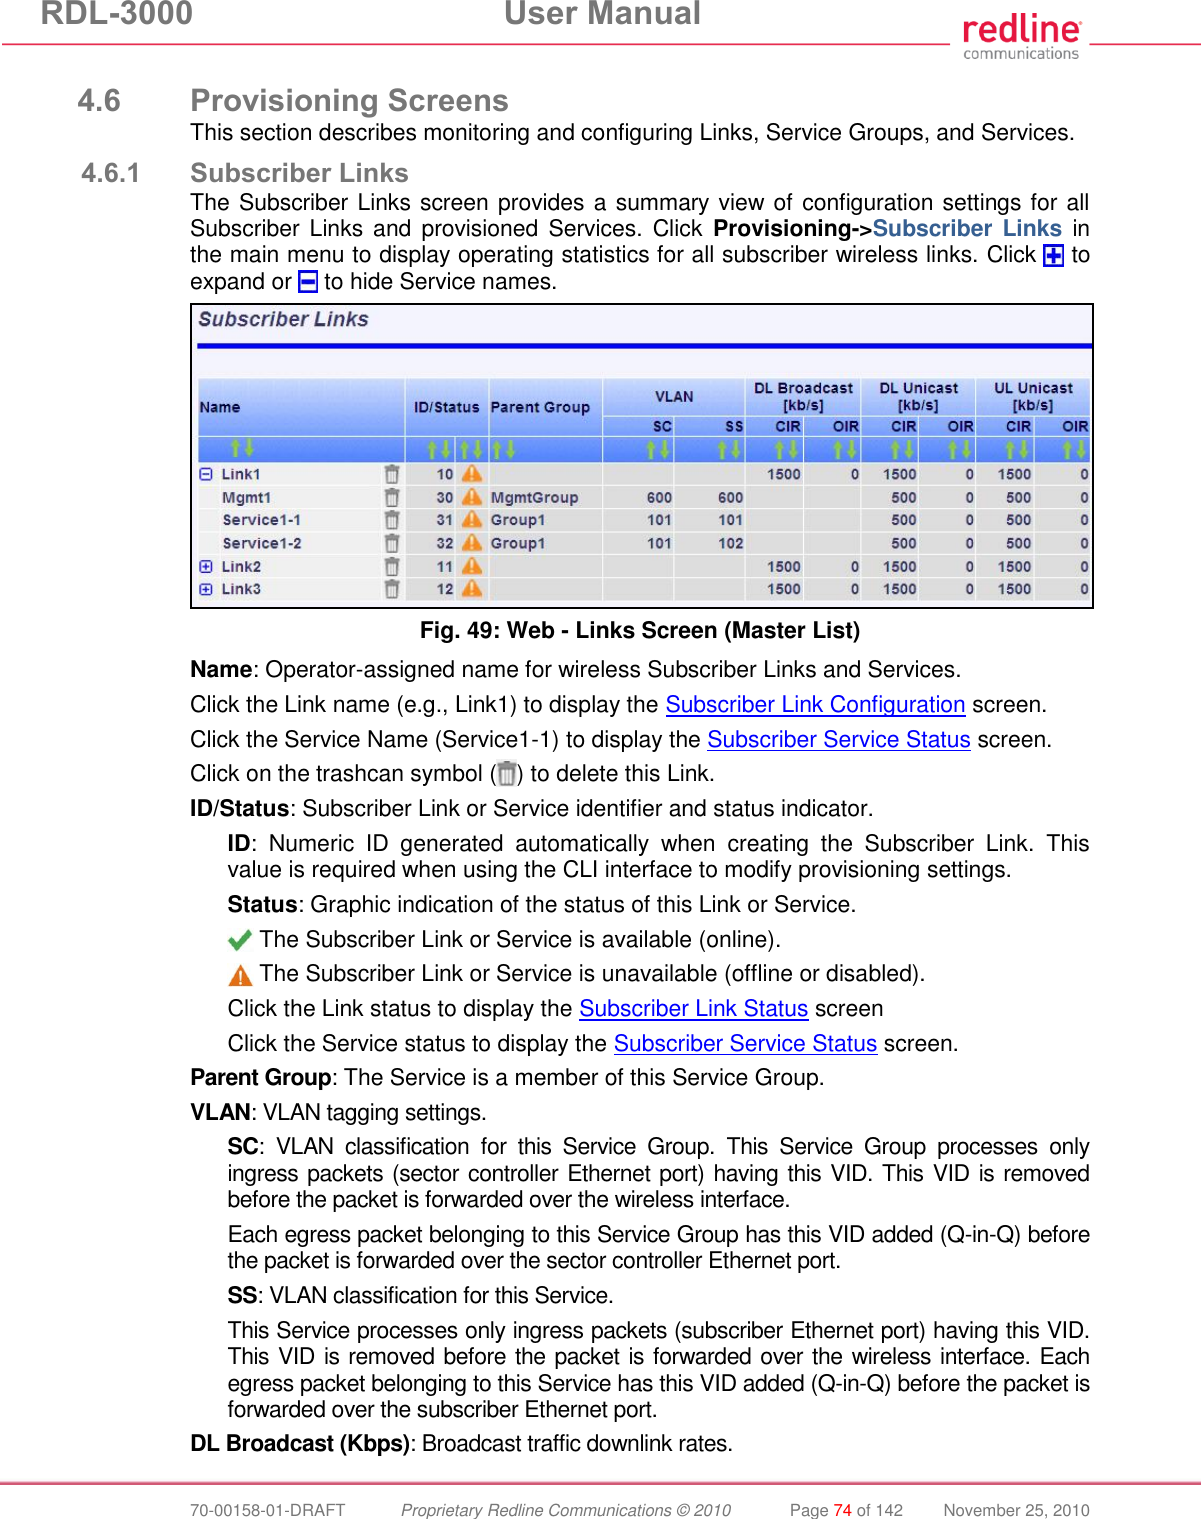 RDL-3000  User Manual  70-00158-01-DRAFT  Proprietary Redline Communications © 2010  Page 74 of 142  November 25, 2010  4.6 Provisioning Screens This section describes monitoring and configuring Links, Service Groups, and Services. 4.6.1 Subscriber Links The Subscriber Links screen provides a summary view of configuration settings for all Subscriber Links and  provisioned Services. Click  Provisioning-&gt;Subscriber Links in the main menu to display operating statistics for all subscriber wireless links. Click   to expand or   to hide Service names.  Fig. 49: Web - Links Screen (Master List) Name: Operator-assigned name for wireless Subscriber Links and Services. Click the Link name (e.g., Link1) to display the Subscriber Link Configuration screen. Click the Service Name (Service1-1) to display the Subscriber Service Status screen. Click on the trashcan symbol ( ) to delete this Link. ID/Status: Subscriber Link or Service identifier and status indicator. ID:  Numeric  ID  generated  automatically  when  creating  the  Subscriber  Link.  This value is required when using the CLI interface to modify provisioning settings. Status: Graphic indication of the status of this Link or Service.  The Subscriber Link or Service is available (online).  The Subscriber Link or Service is unavailable (offline or disabled). Click the Link status to display the Subscriber Link Status screen Click the Service status to display the Subscriber Service Status screen. Parent Group: The Service is a member of this Service Group. VLAN: VLAN tagging settings. SC:  VLAN  classification  for  this  Service  Group.  This  Service  Group  processes  only ingress packets (sector controller Ethernet port) having this VID. This VID is removed before the packet is forwarded over the wireless interface.  Each egress packet belonging to this Service Group has this VID added (Q-in-Q) before the packet is forwarded over the sector controller Ethernet port. SS: VLAN classification for this Service. This Service processes only ingress packets (subscriber Ethernet port) having this VID. This VID is removed before the packet is forwarded over the wireless interface. Each egress packet belonging to this Service has this VID added (Q-in-Q) before the packet is forwarded over the subscriber Ethernet port. DL Broadcast (Kbps): Broadcast traffic downlink rates. 